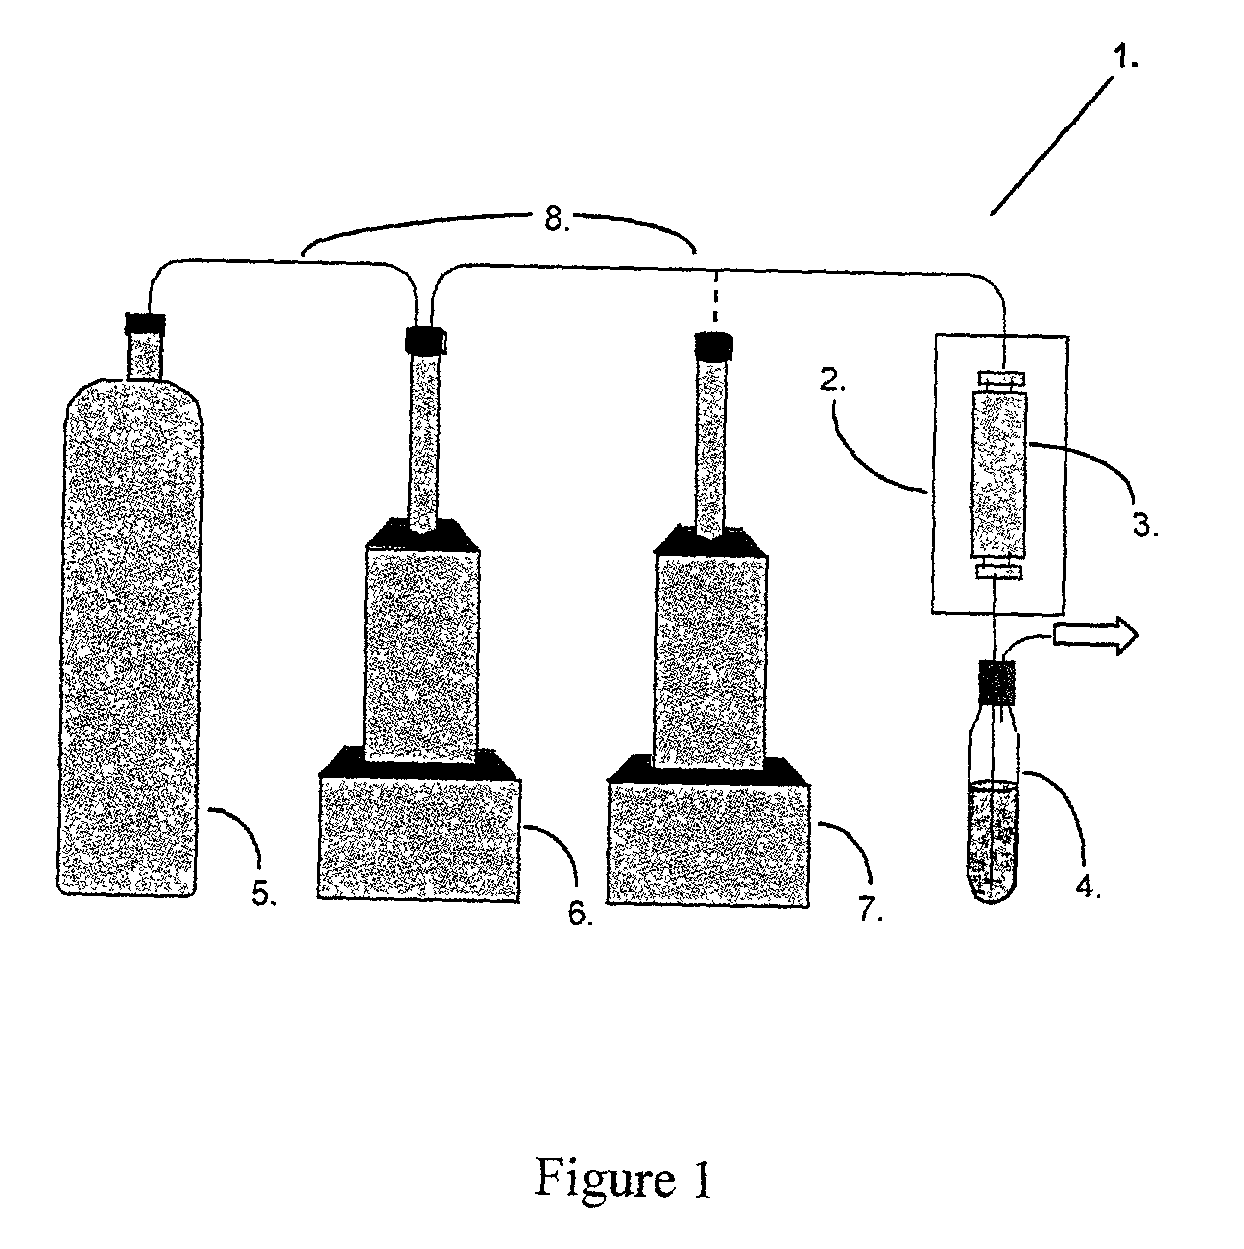 Method of treating cellulose fibers and products obtained thereby